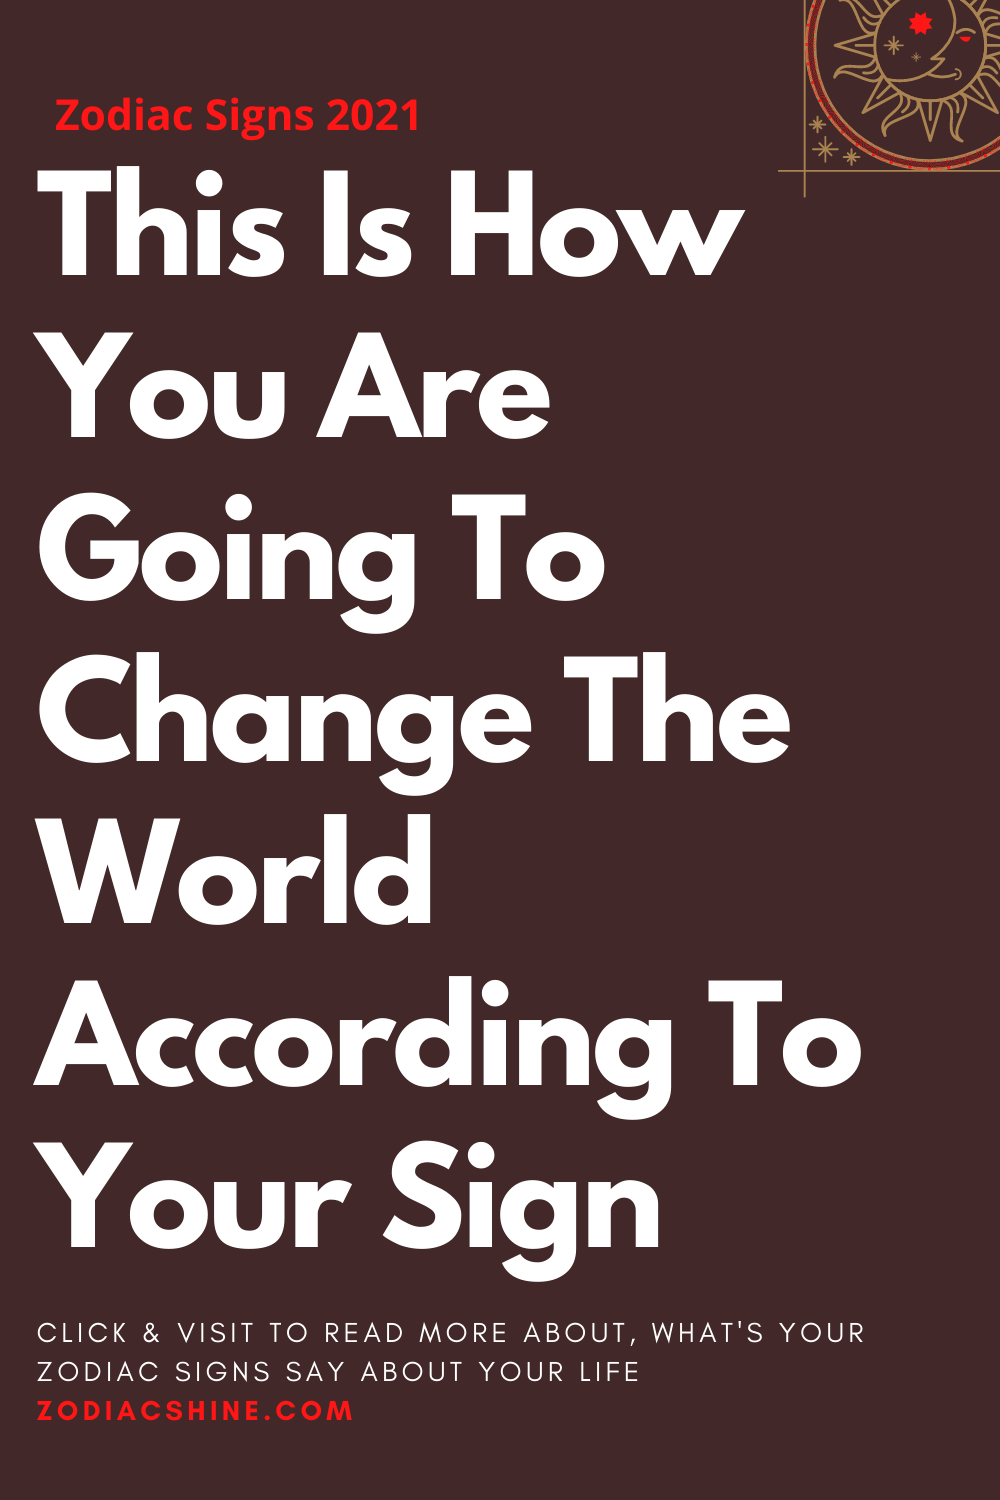 This Is How You Are Going To Change The World According To Your Sign